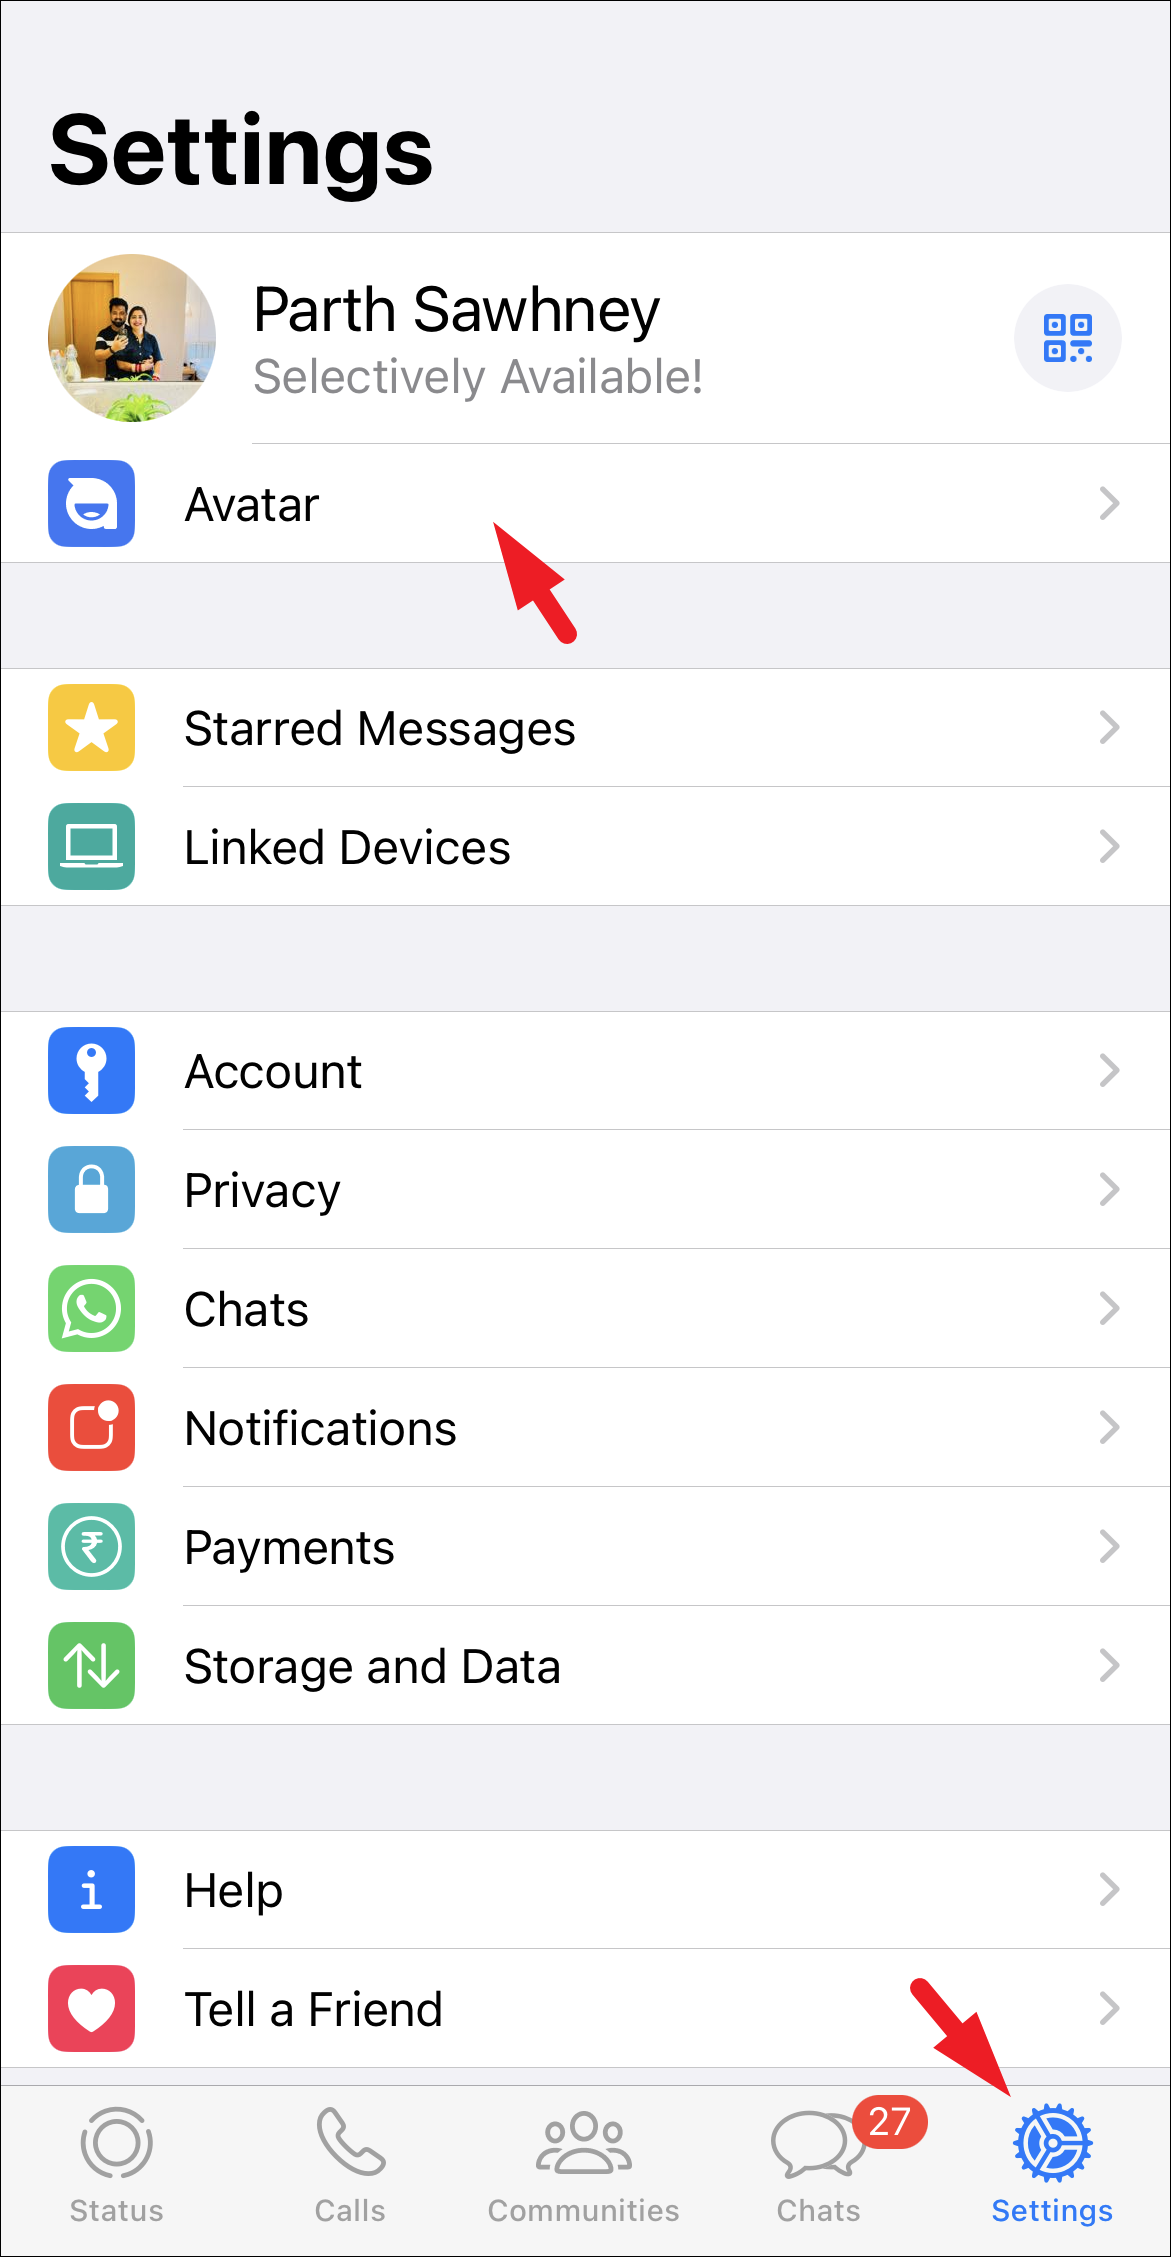 How to set your iMessage profile picture and name